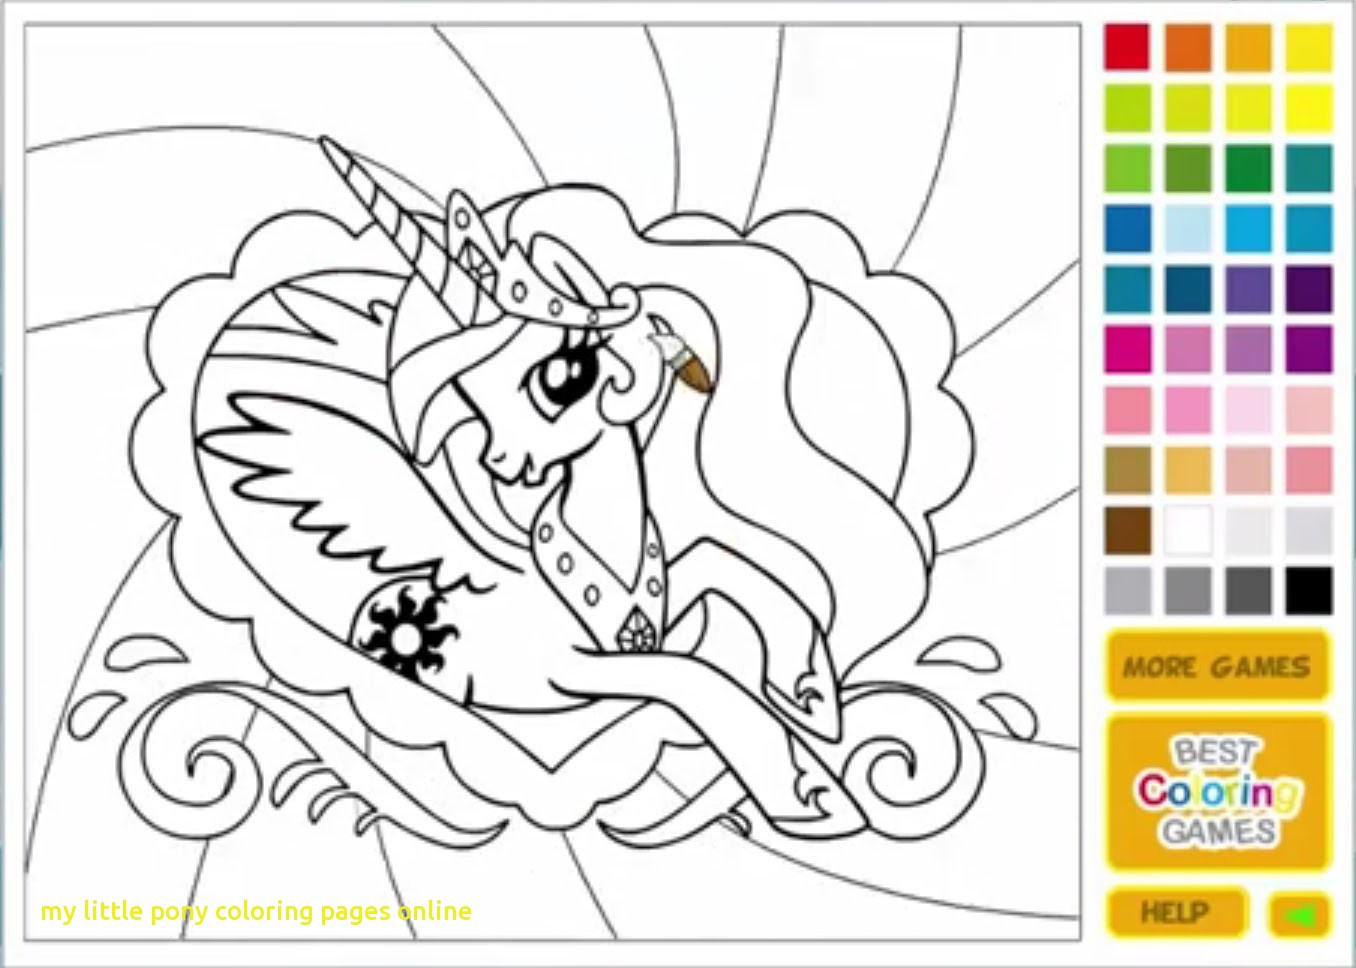 Coloring Pages To Color Online For Free
 My Little Pony Coloring Pages line